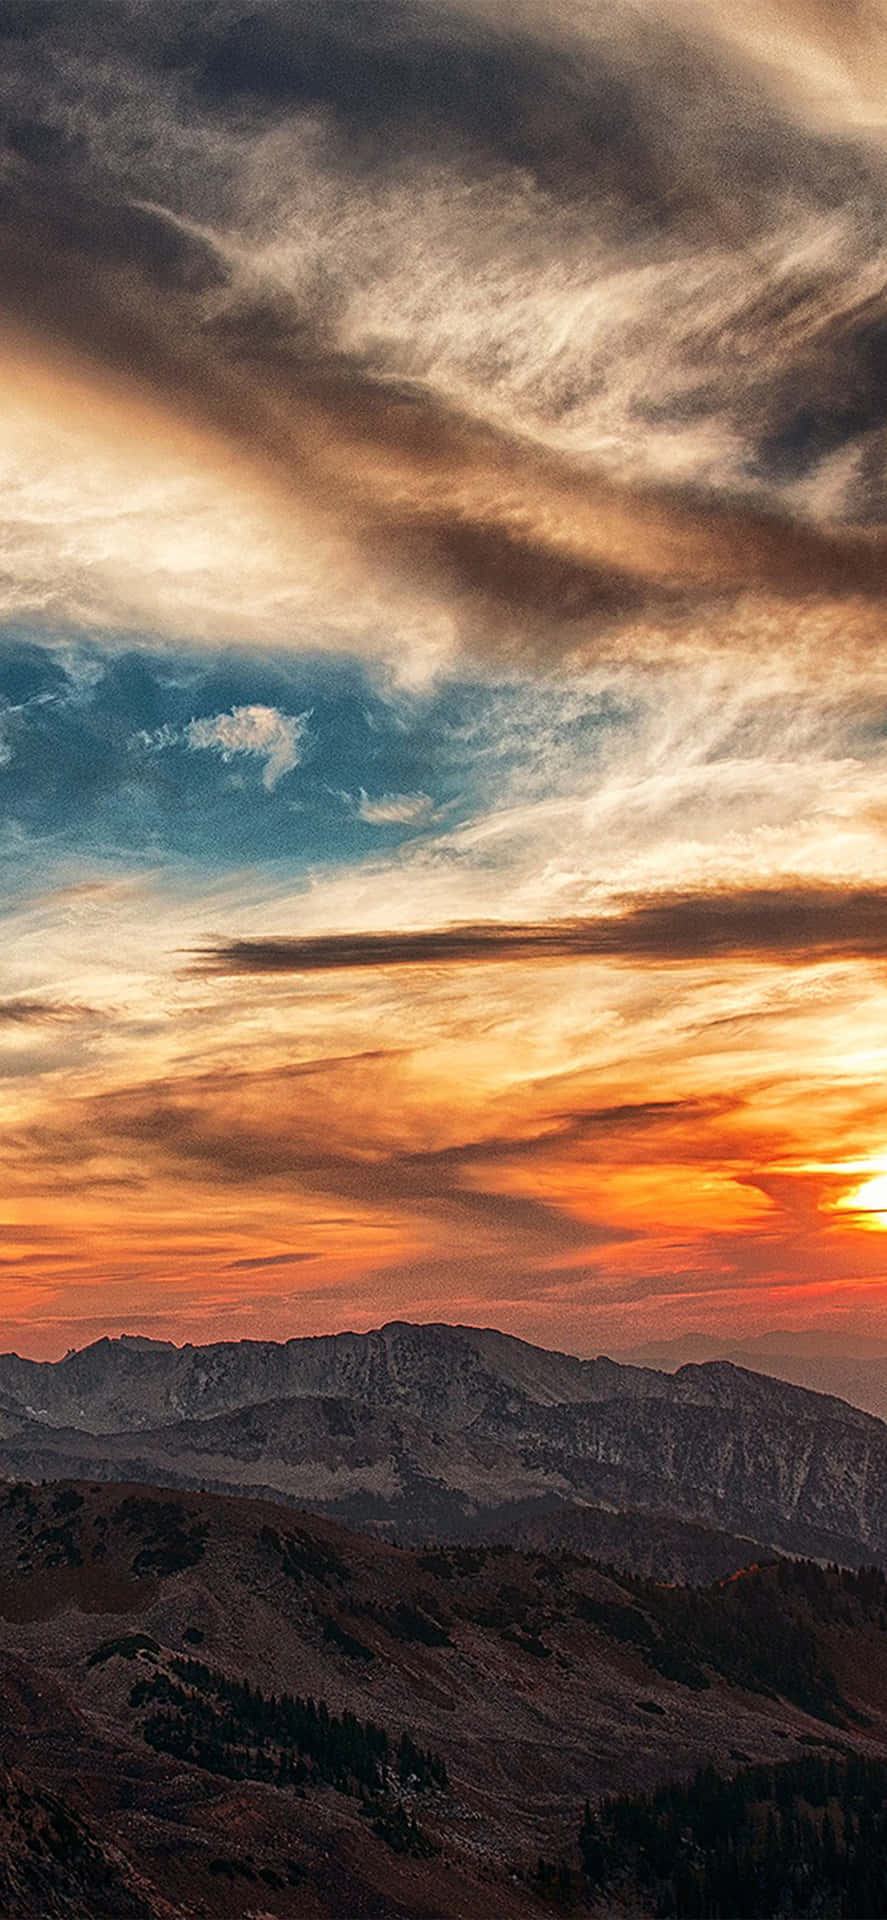 Sunset Cloud Over The Mountains Wallpaper